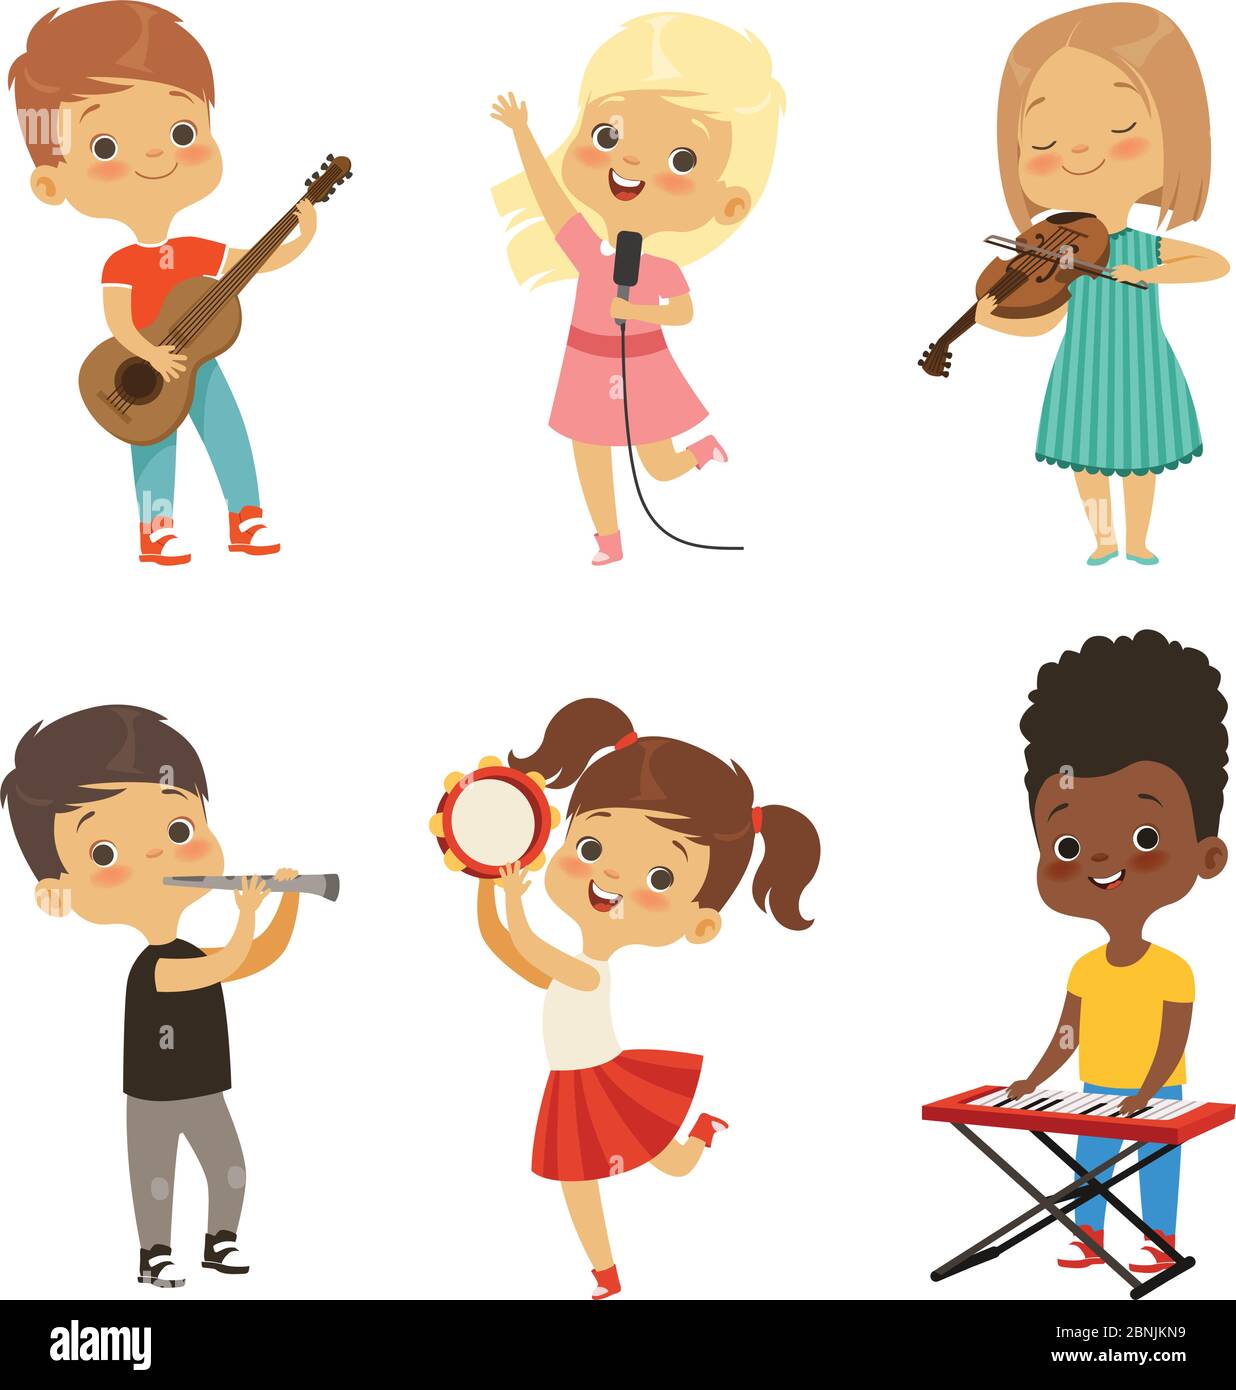 Children violin child musicians Cut Out Stock Images & Pictures - Alamy